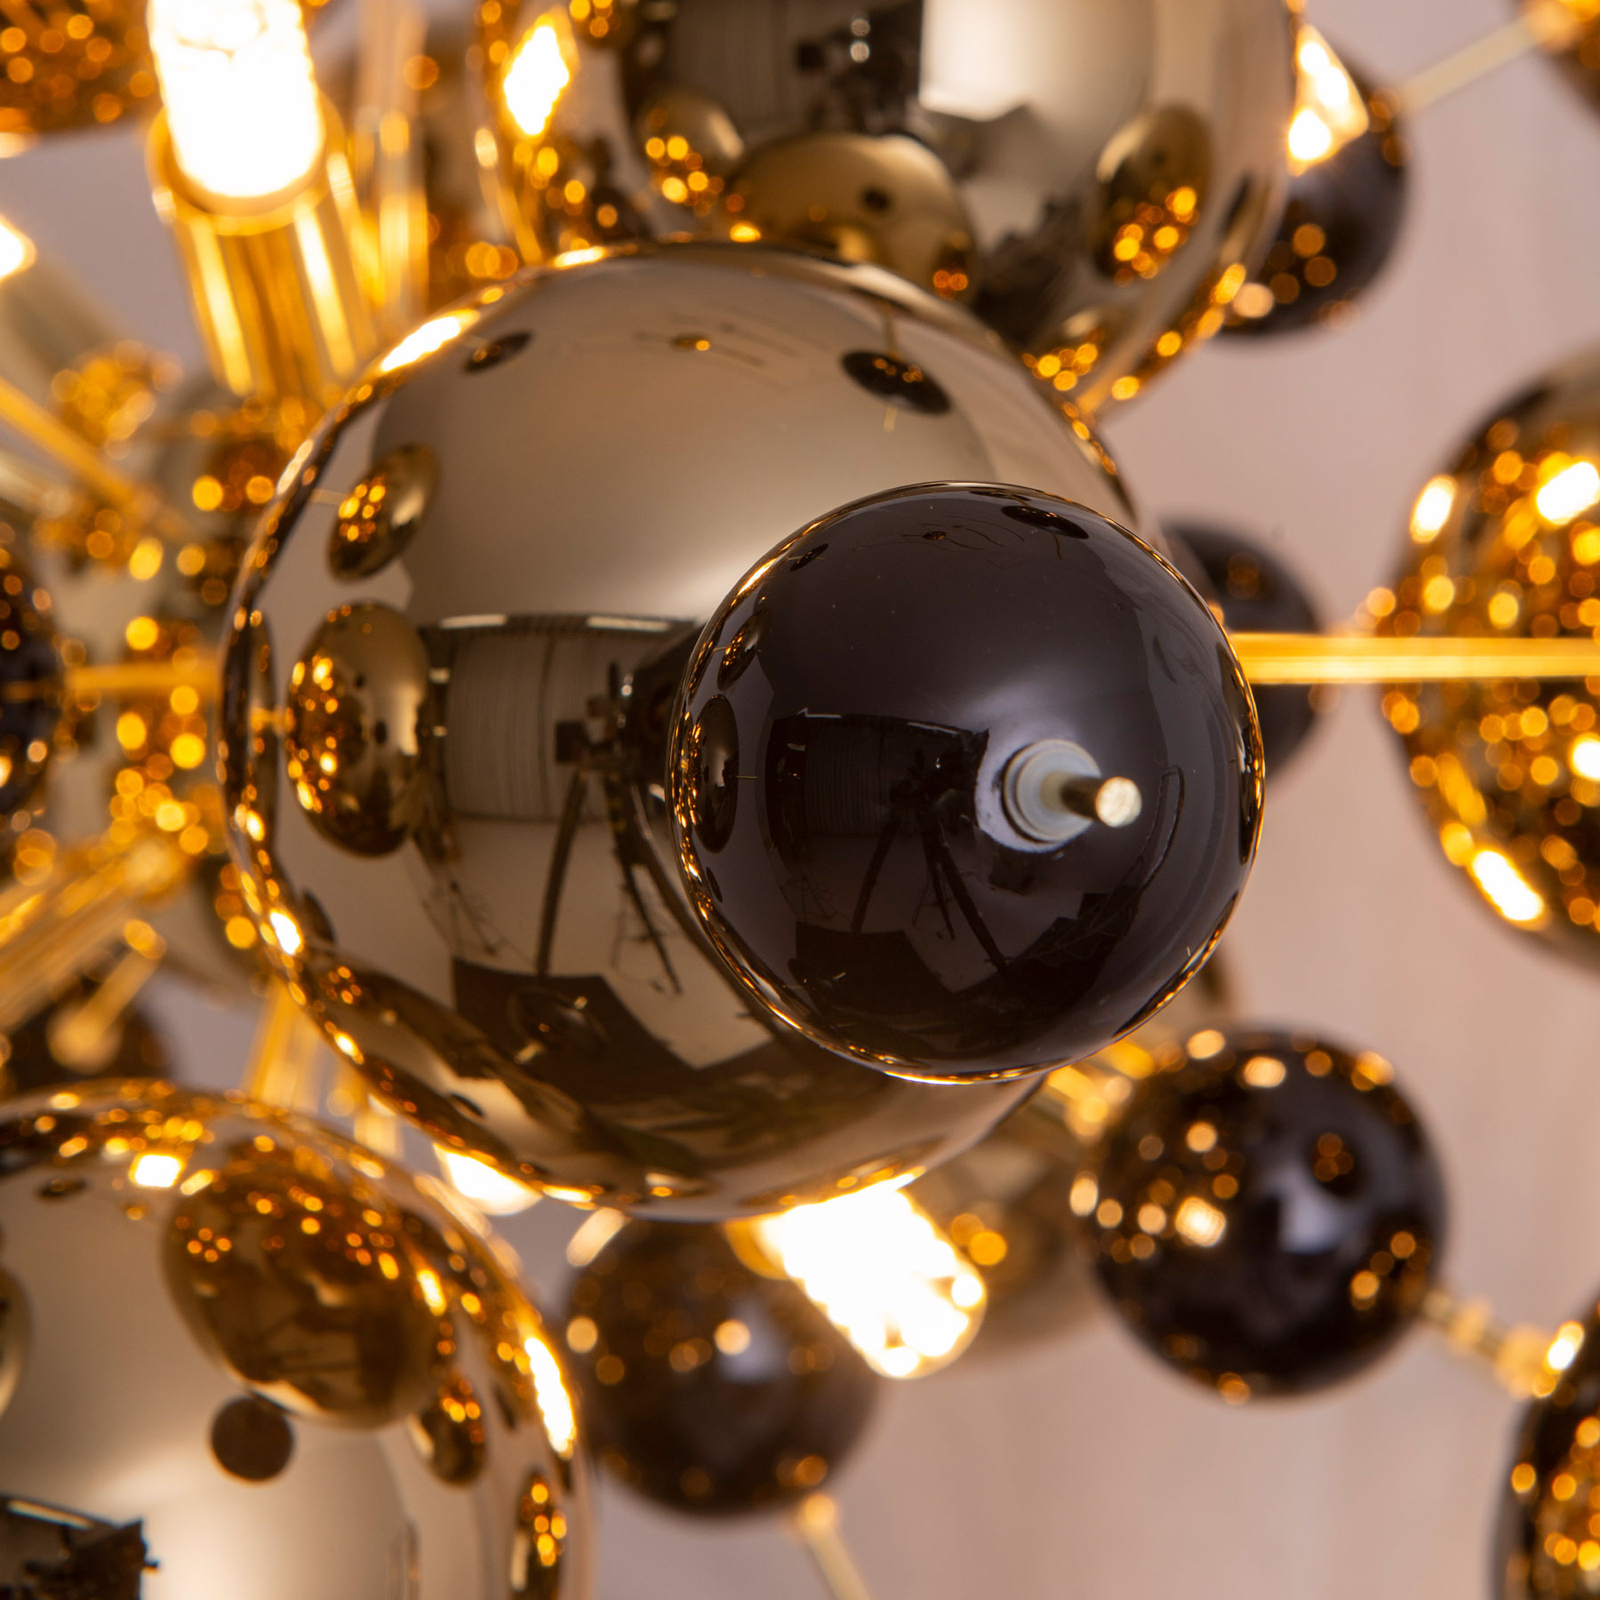 Explosion hanging light with golden globes